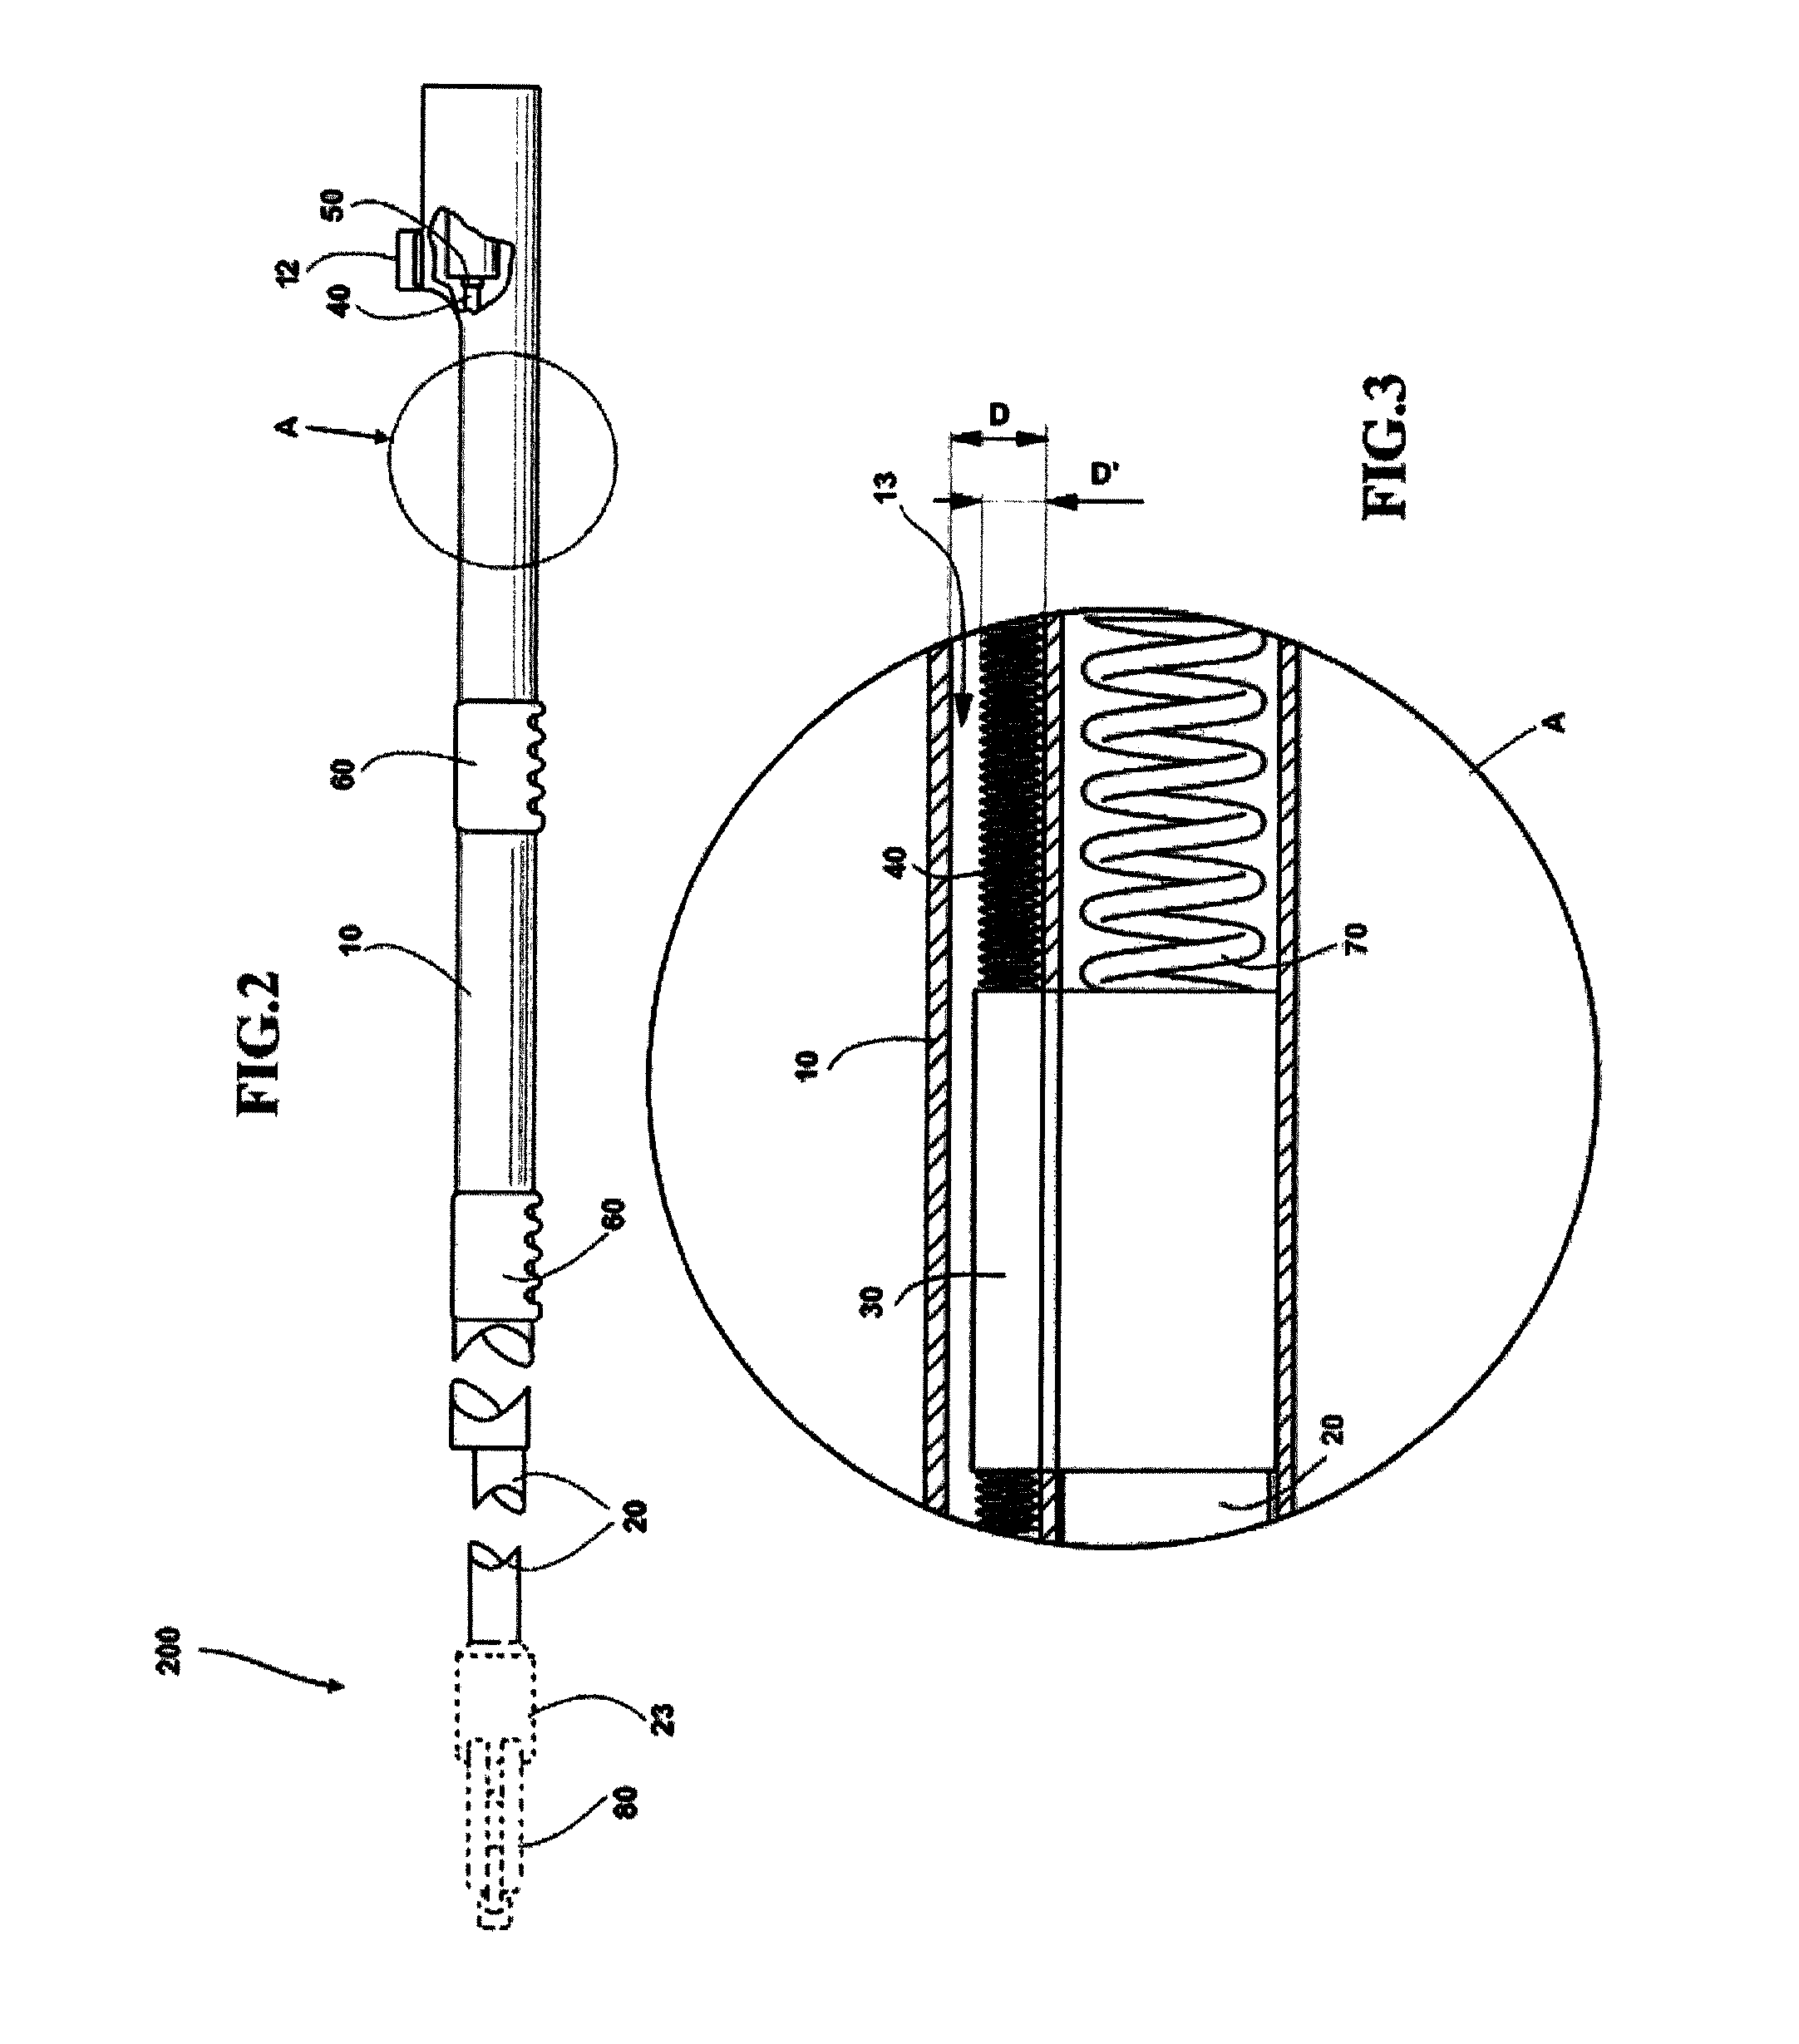 Telescopic rod for handling a tool